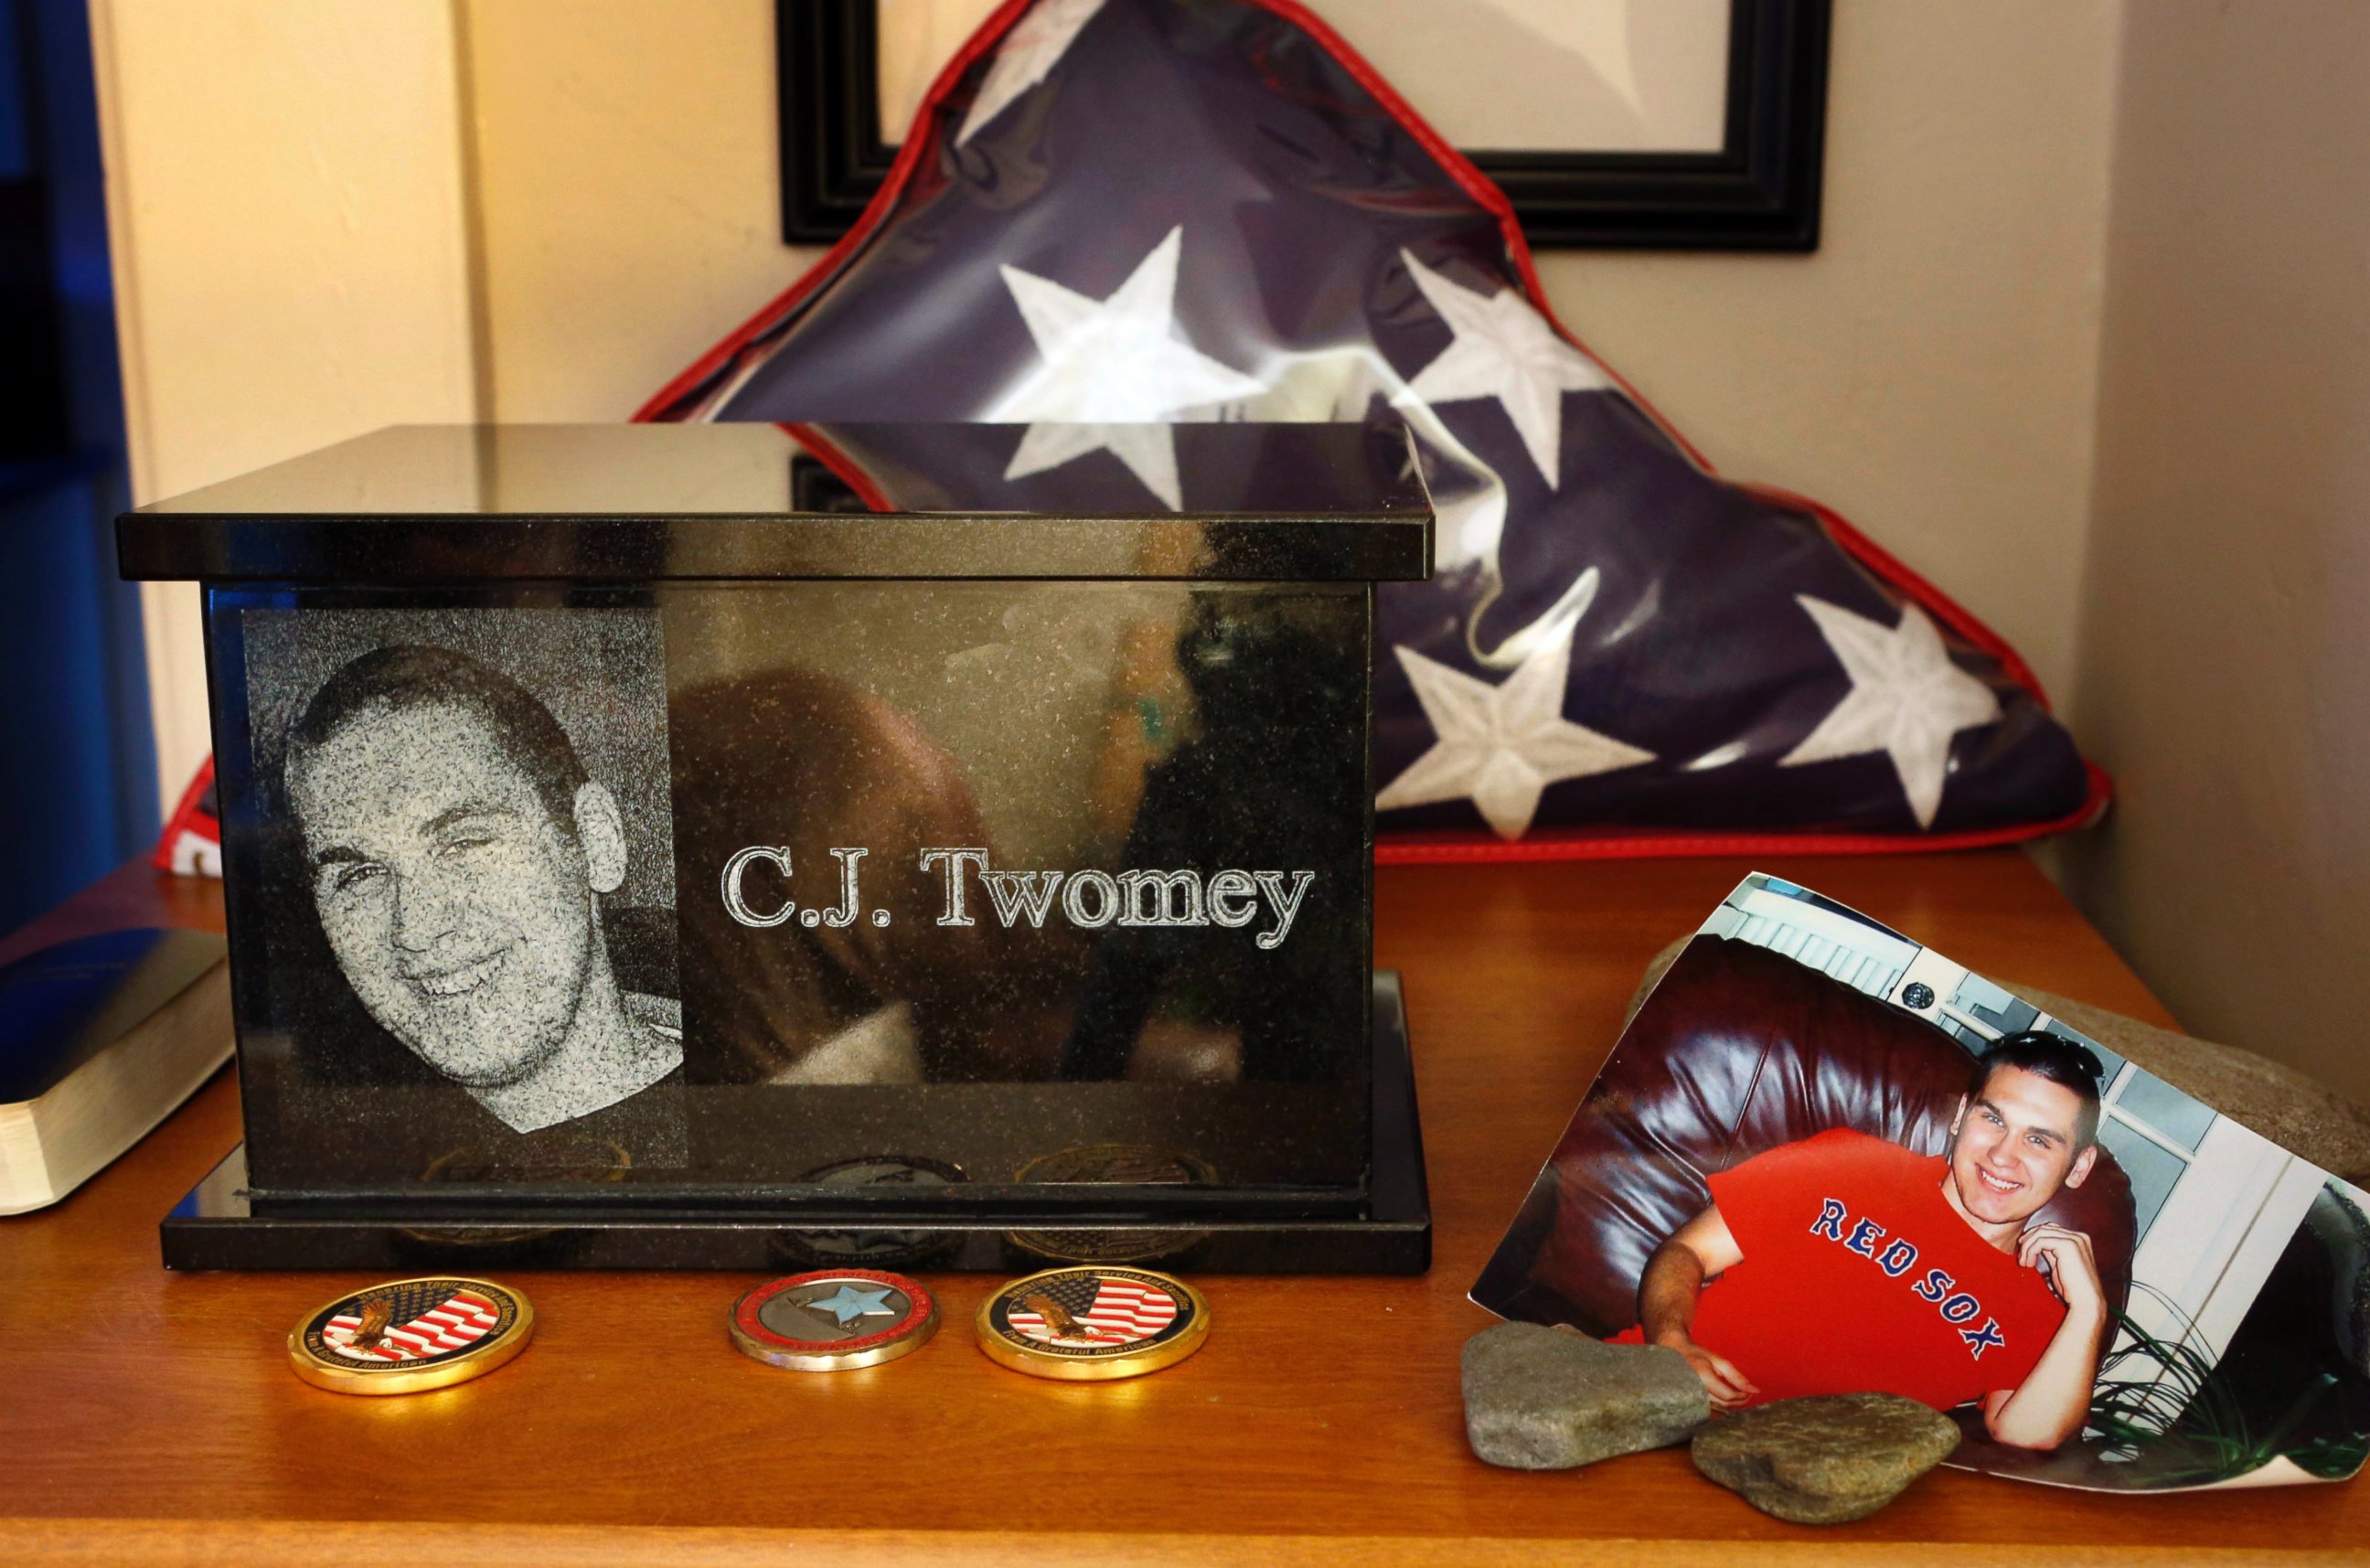 PHOTO: In this Dec. 17, 2013 file photo, an urn containing the ashes of C.J. 